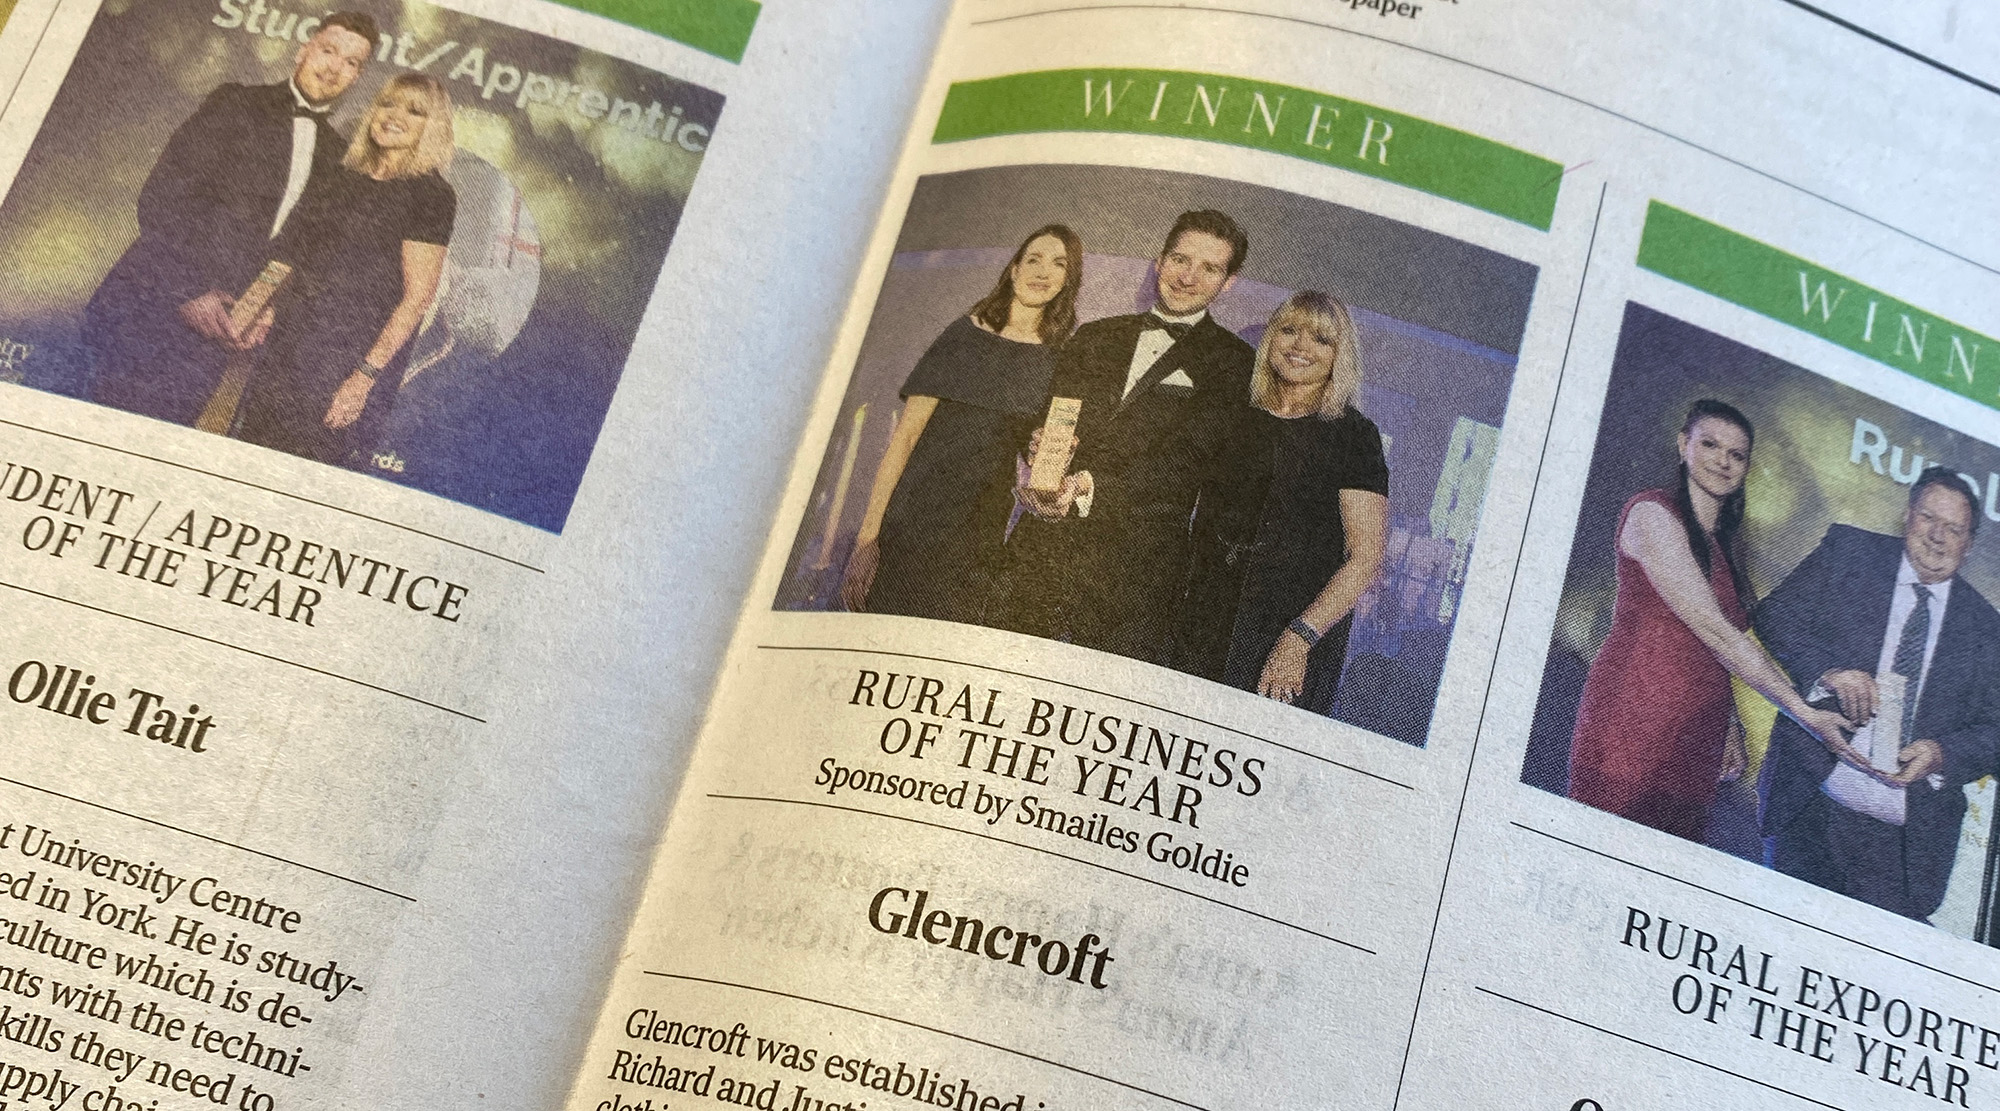 Glencroft featured in Yorkshire Post newspaper for award